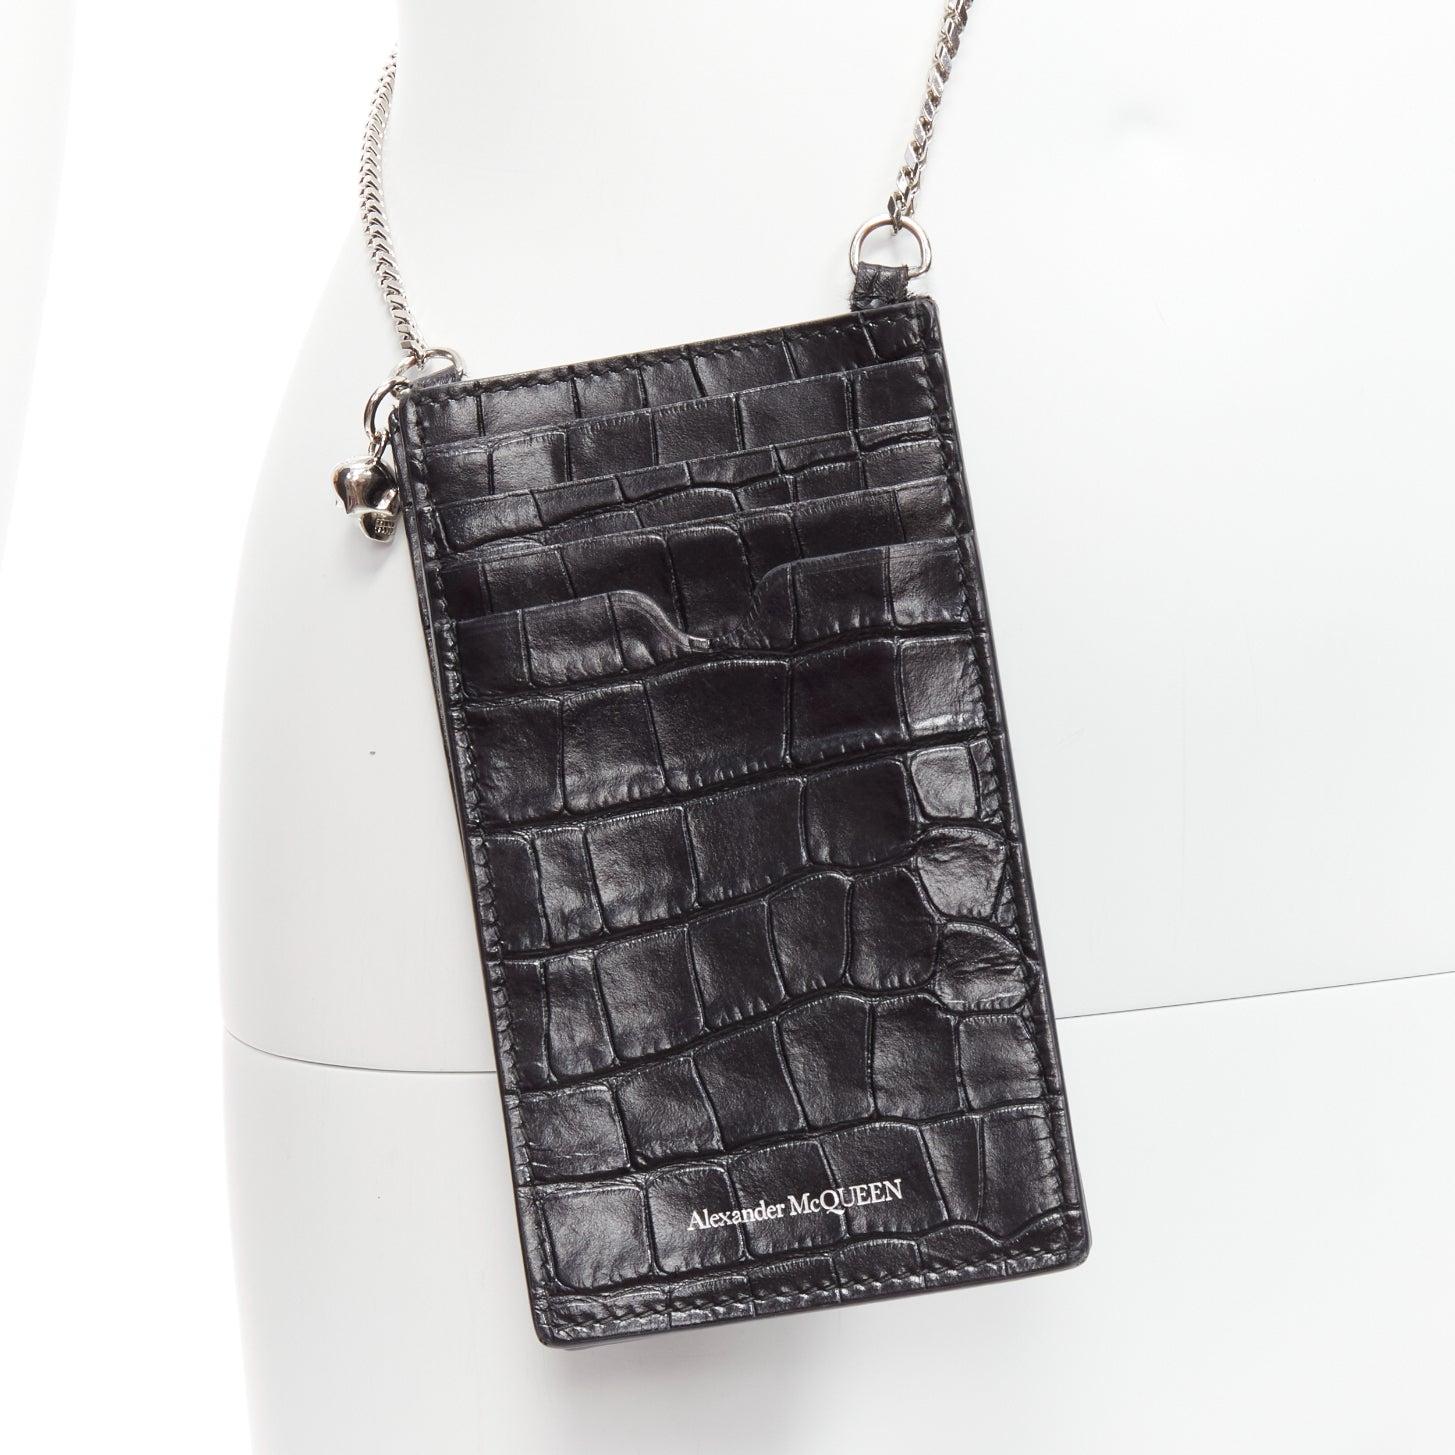 ALEXANDER MCQUEEN black mock croc leather skull charm silver chain logo crossbody phone holder bag
Reference: KEDG/A00259
Brand: Alexander McQueen
Material: Leather, Metal
Color: Black
Pattern: Animal Print
Lining: Black Leather
Extra Details: Skull